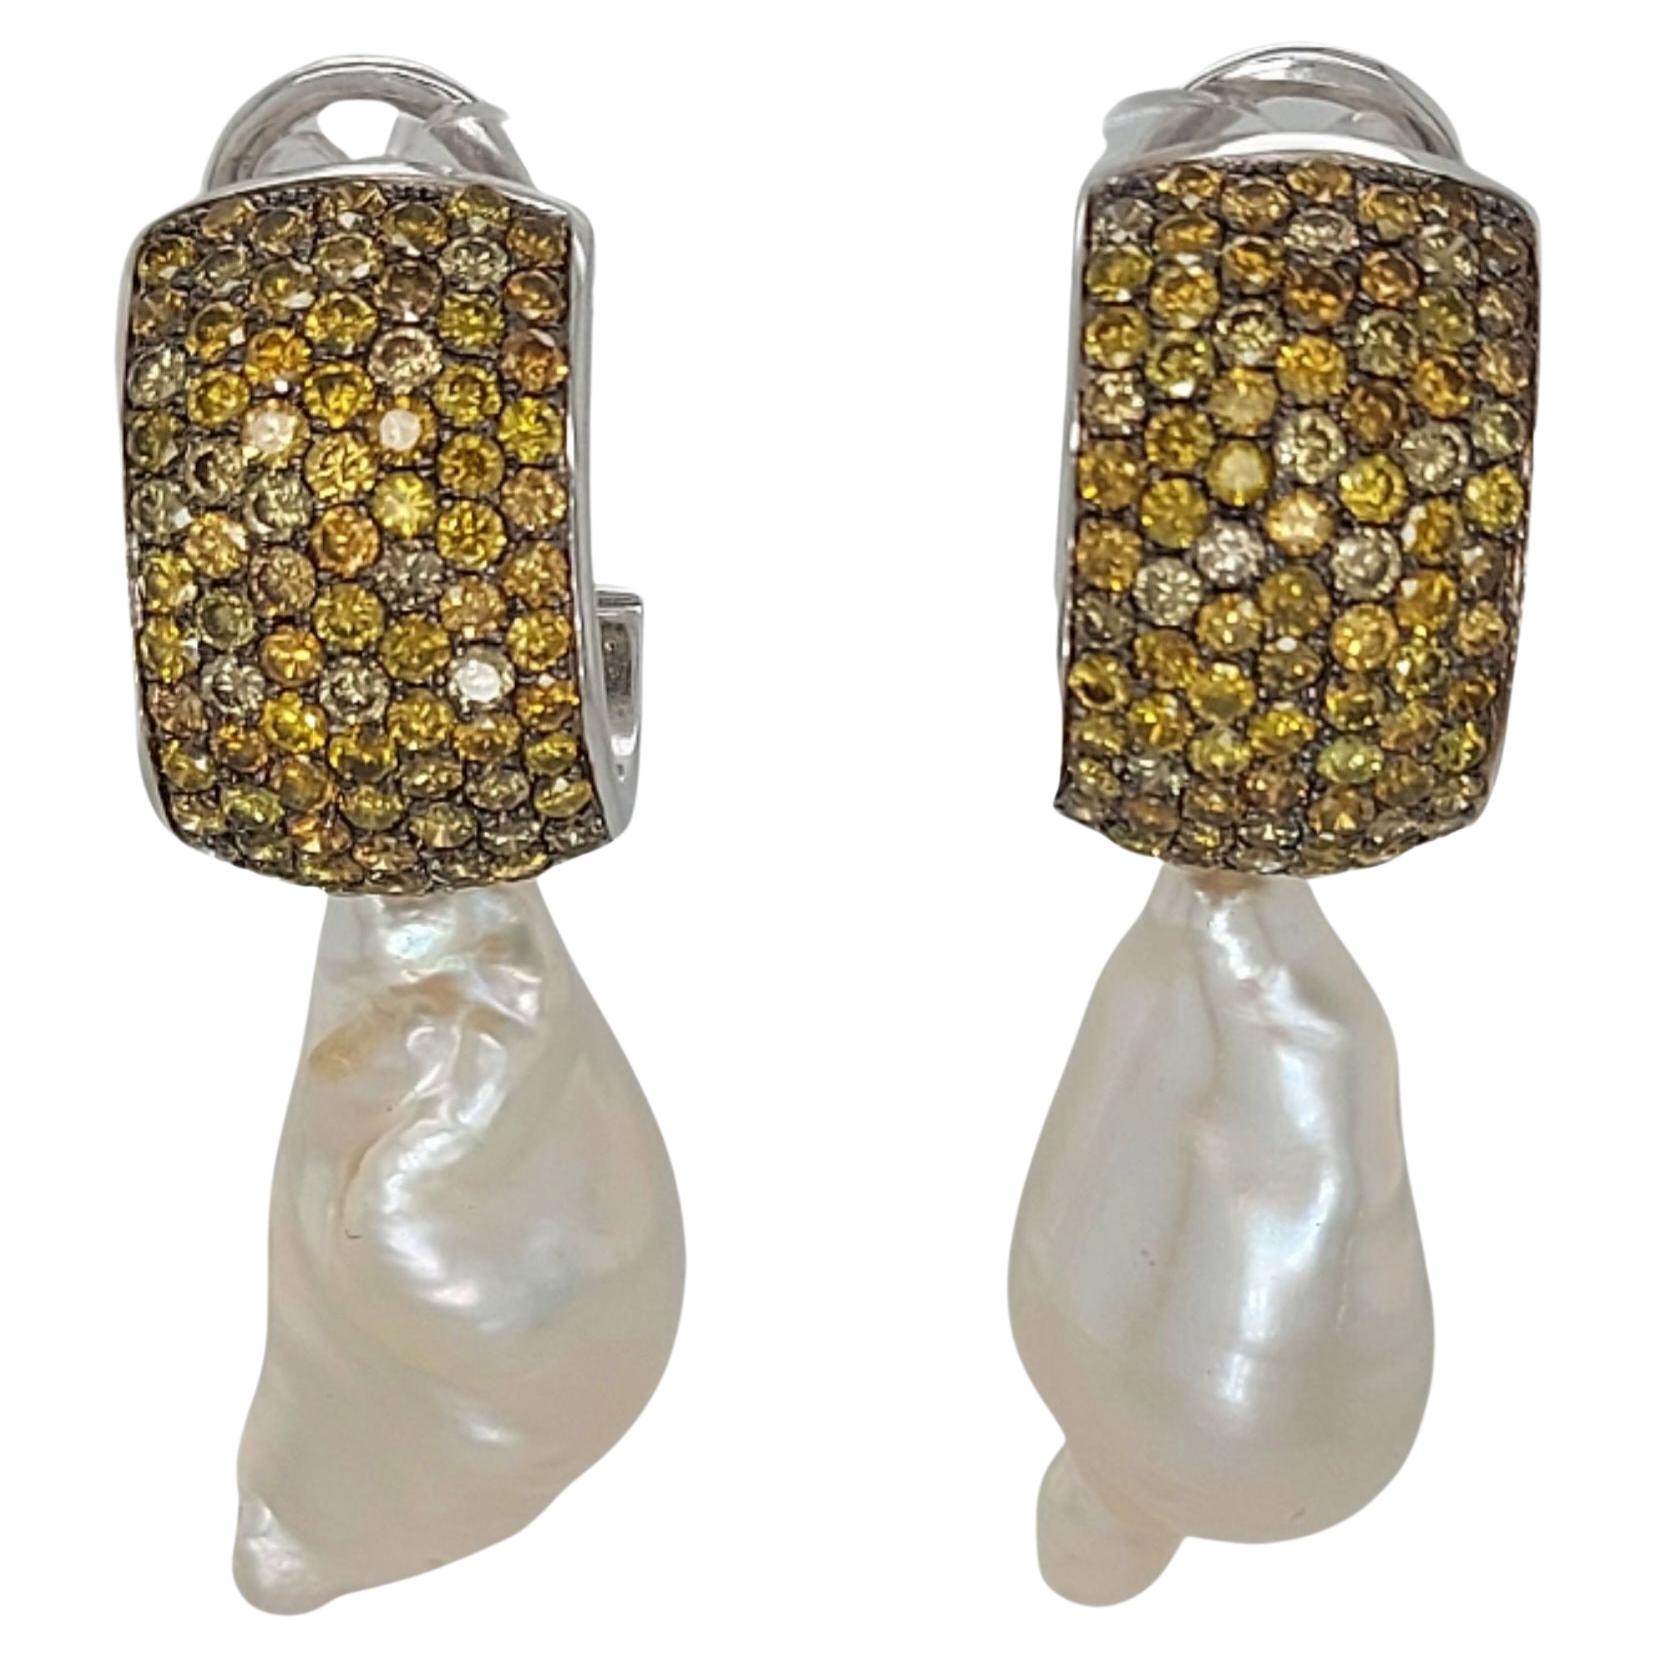 18kt White Gold Earrings with Yellow/Cognac 5.25ct Diamonds & 4 Removable Pieces